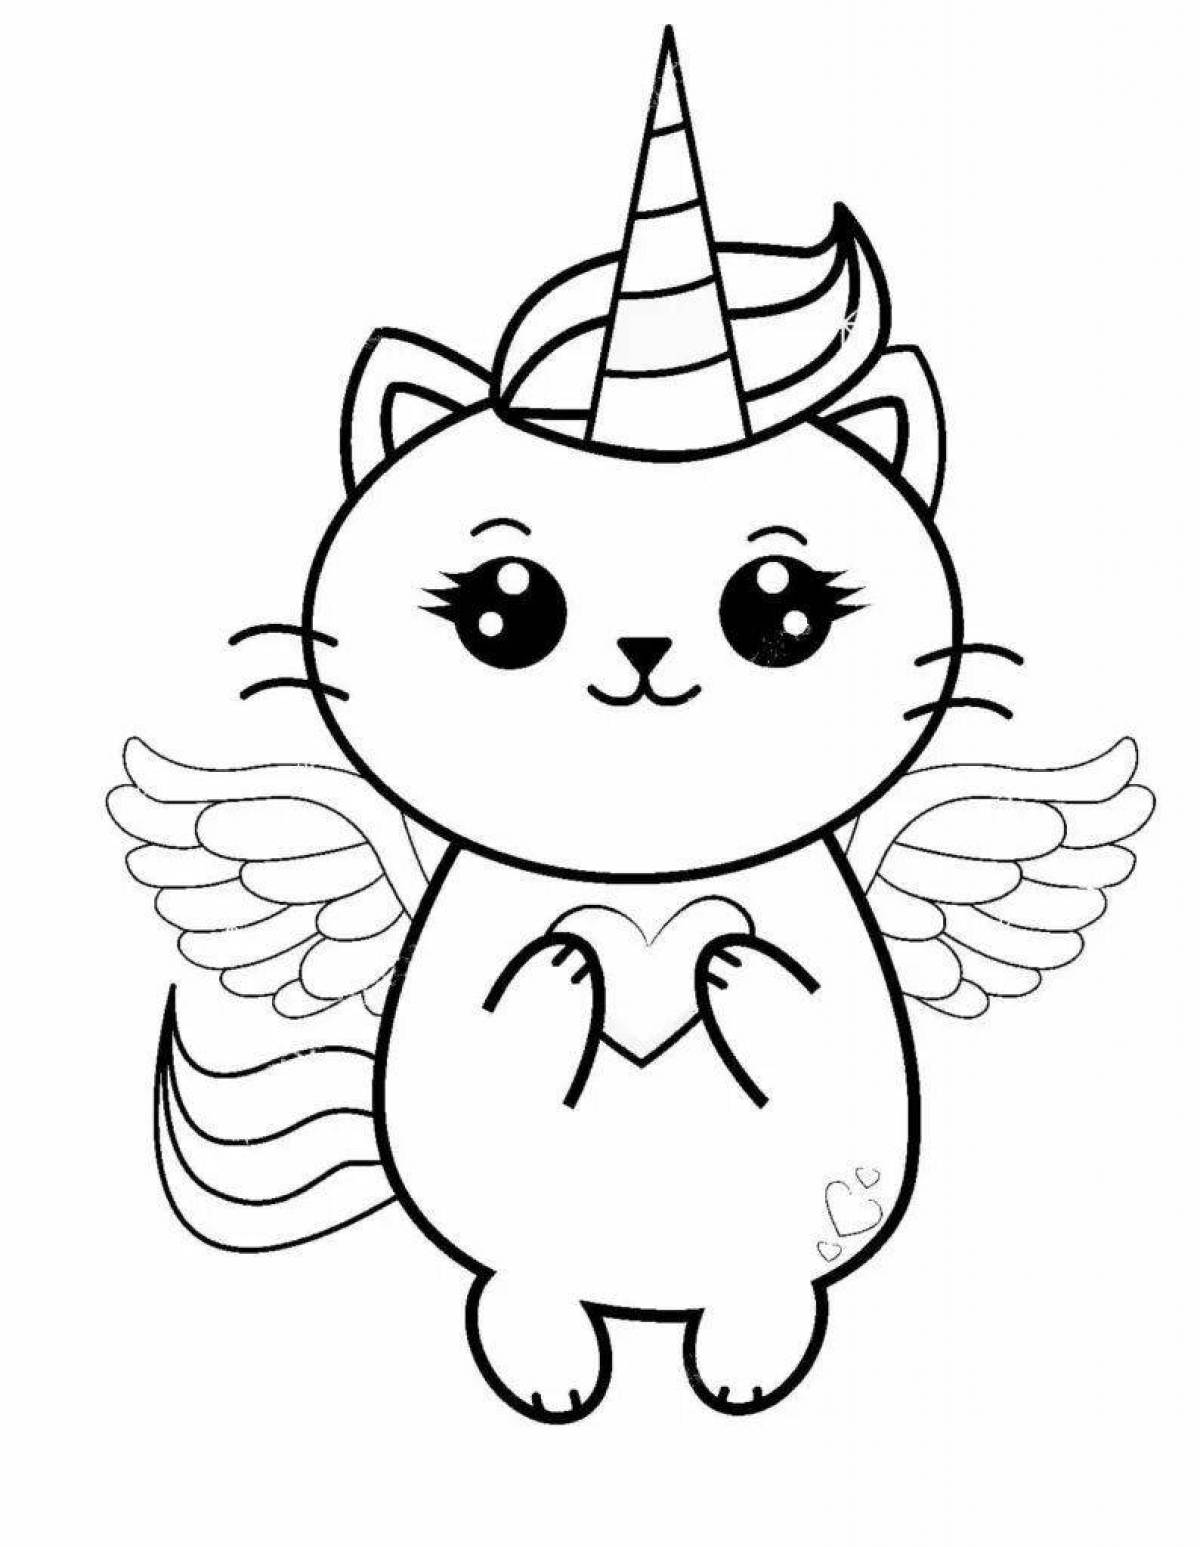 Incredible unicorn cat coloring book for girls